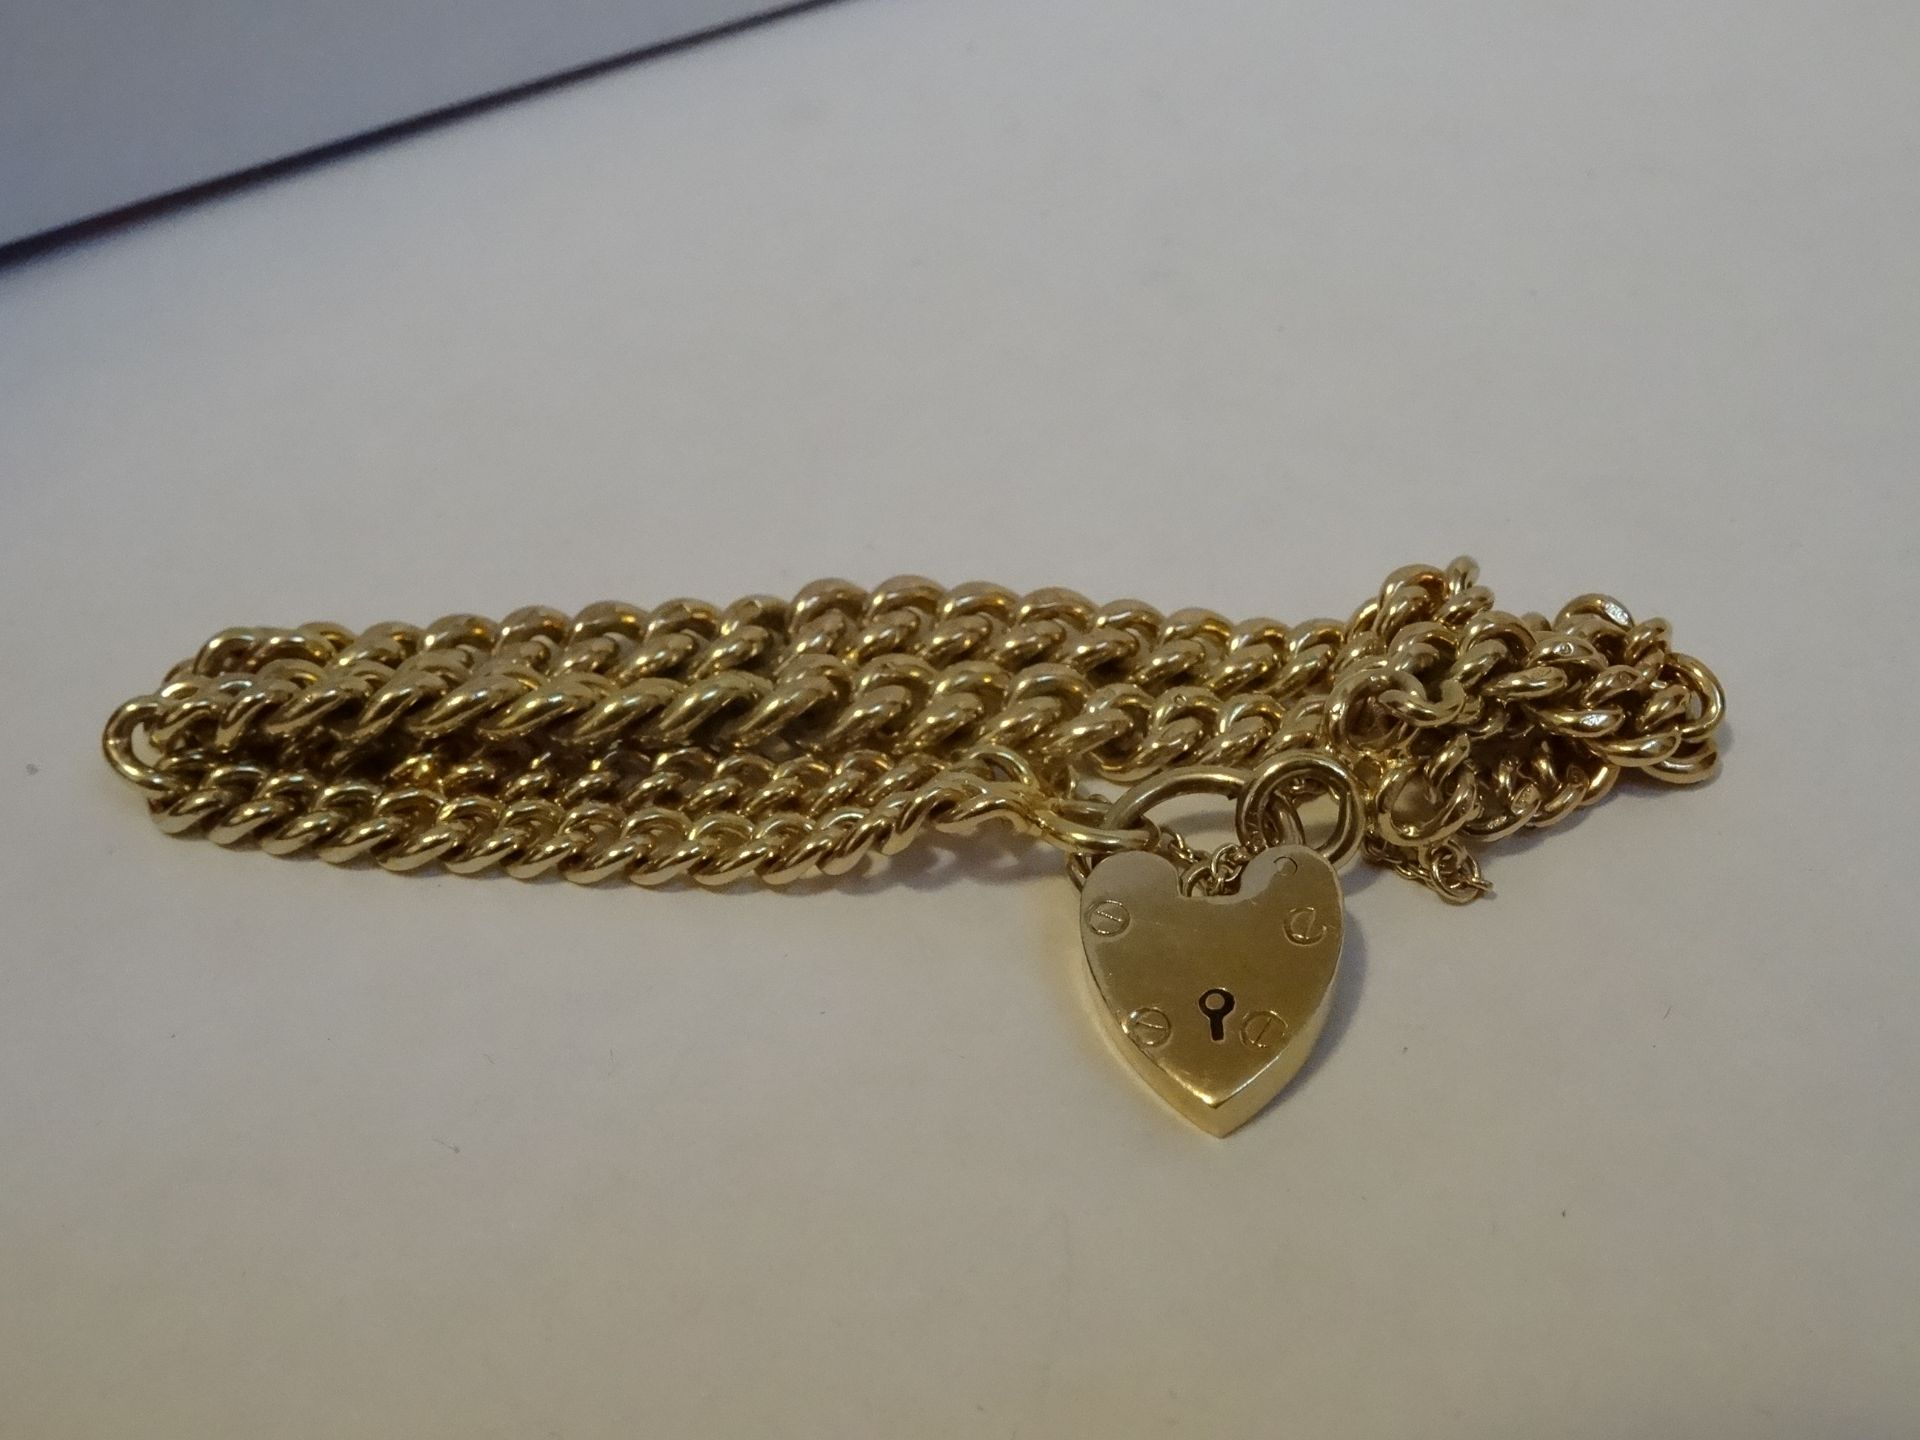 9 Carat Yellow Gold Curb Style Bracelet, with heart lock clasp. - Image 2 of 3